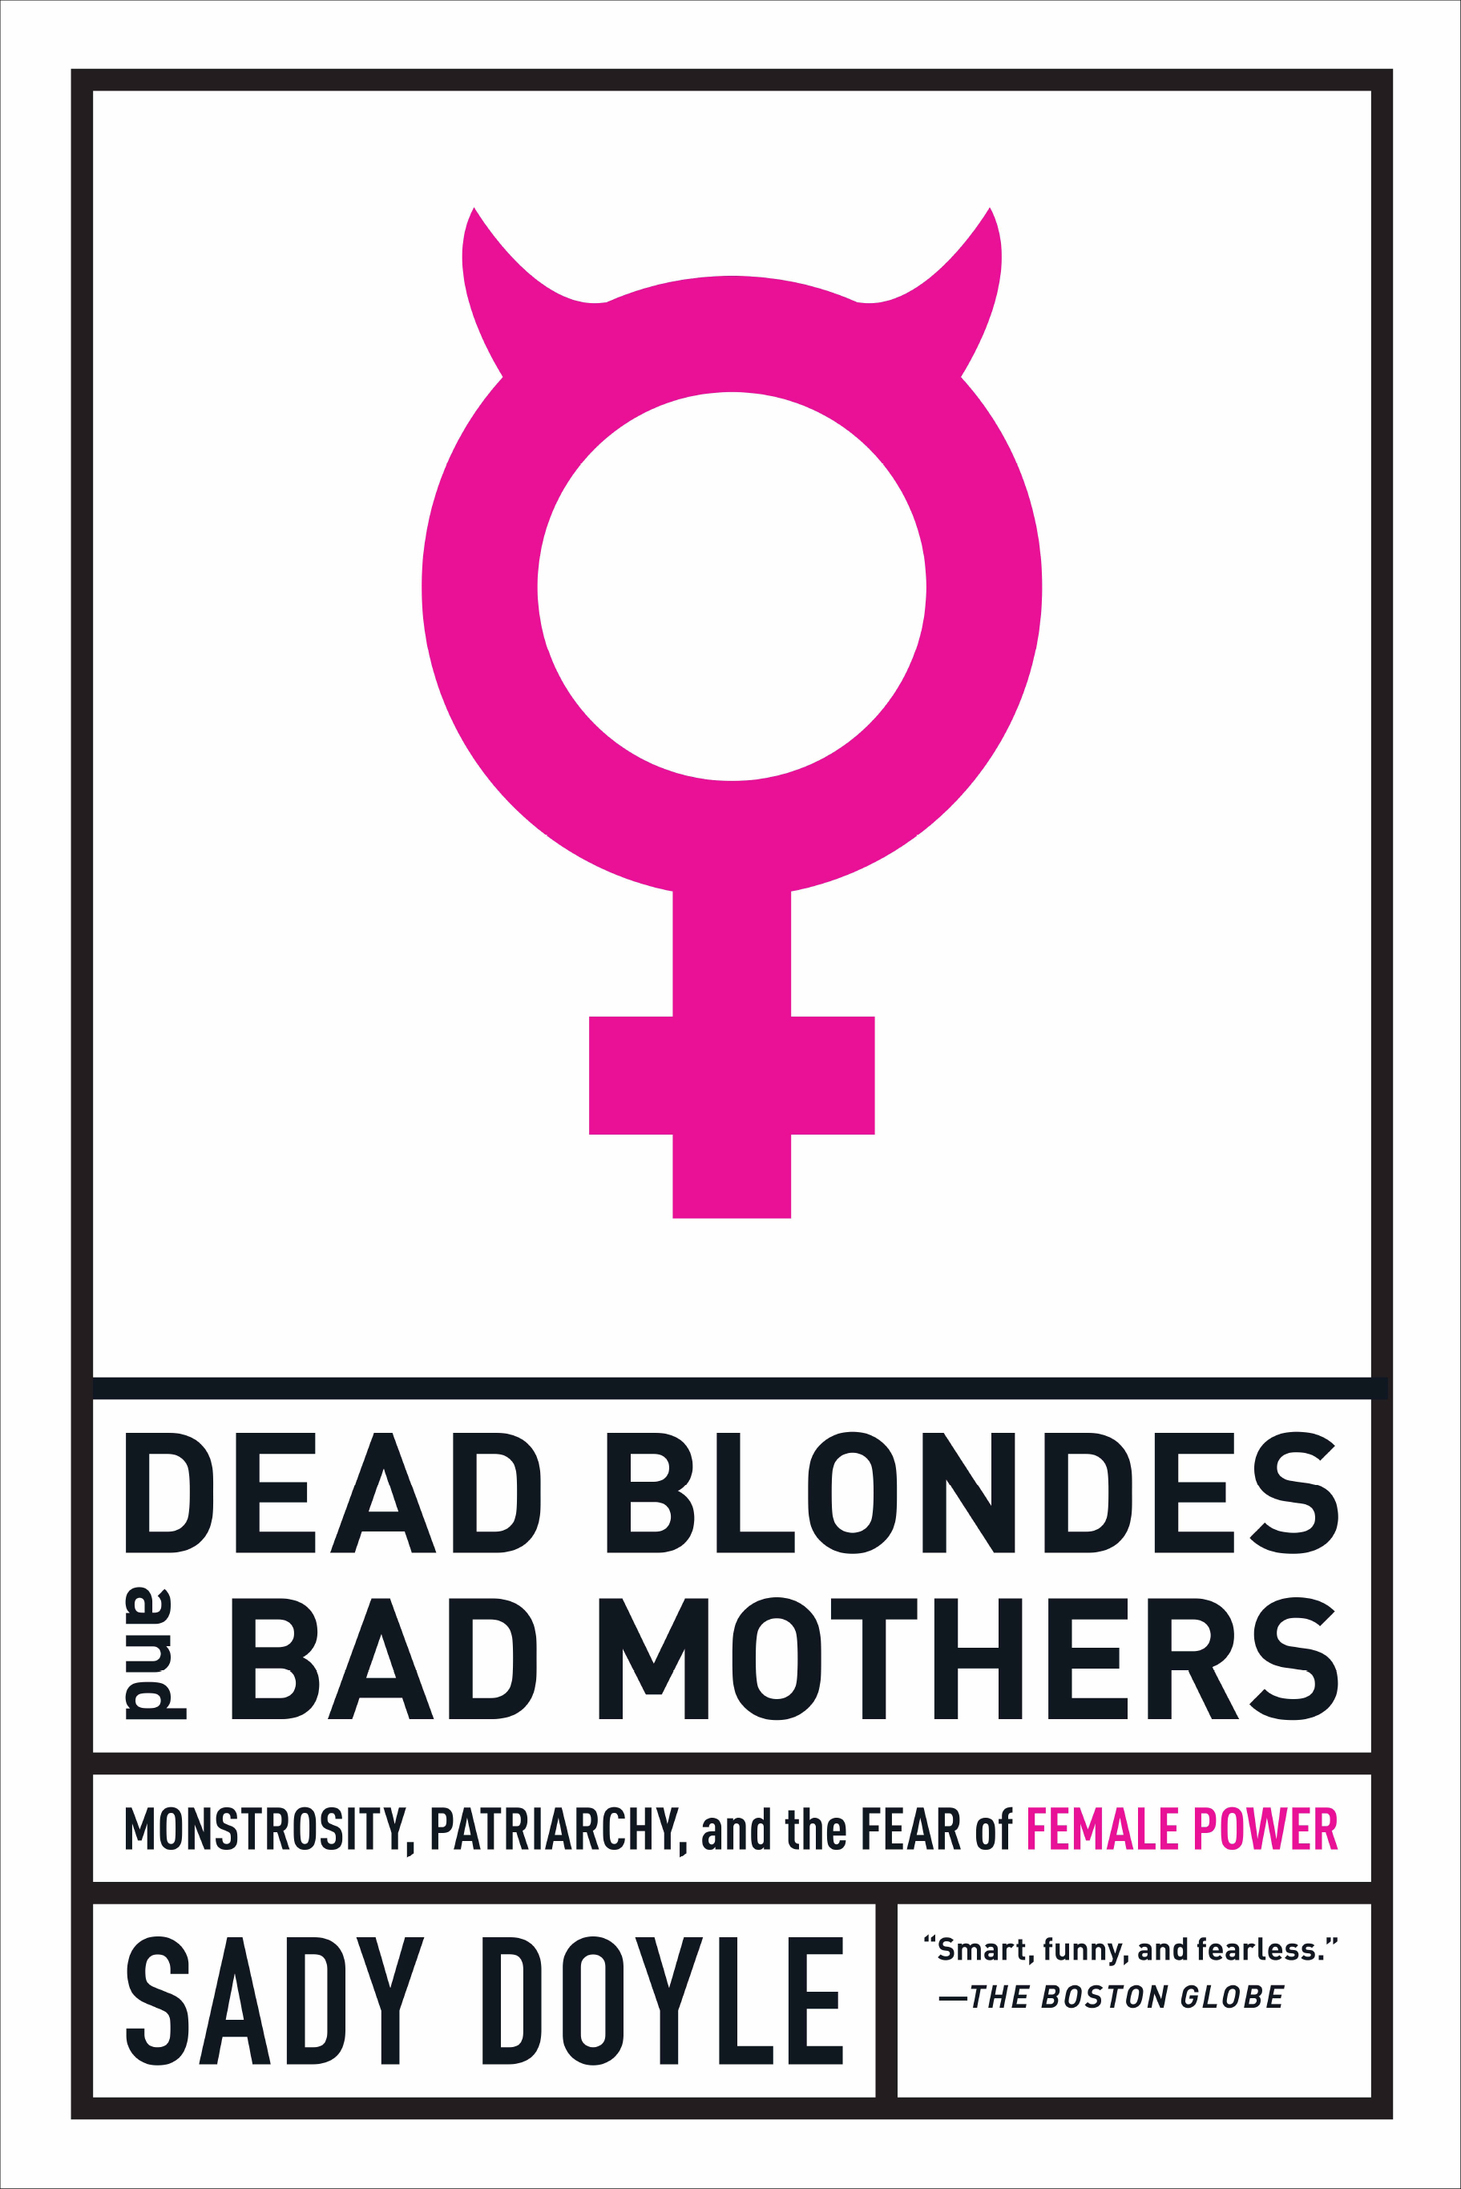 DEAD BLONDES AND BAD MOTHERS Copyright Sady Doyle 2019 All rights reserved - photo 1